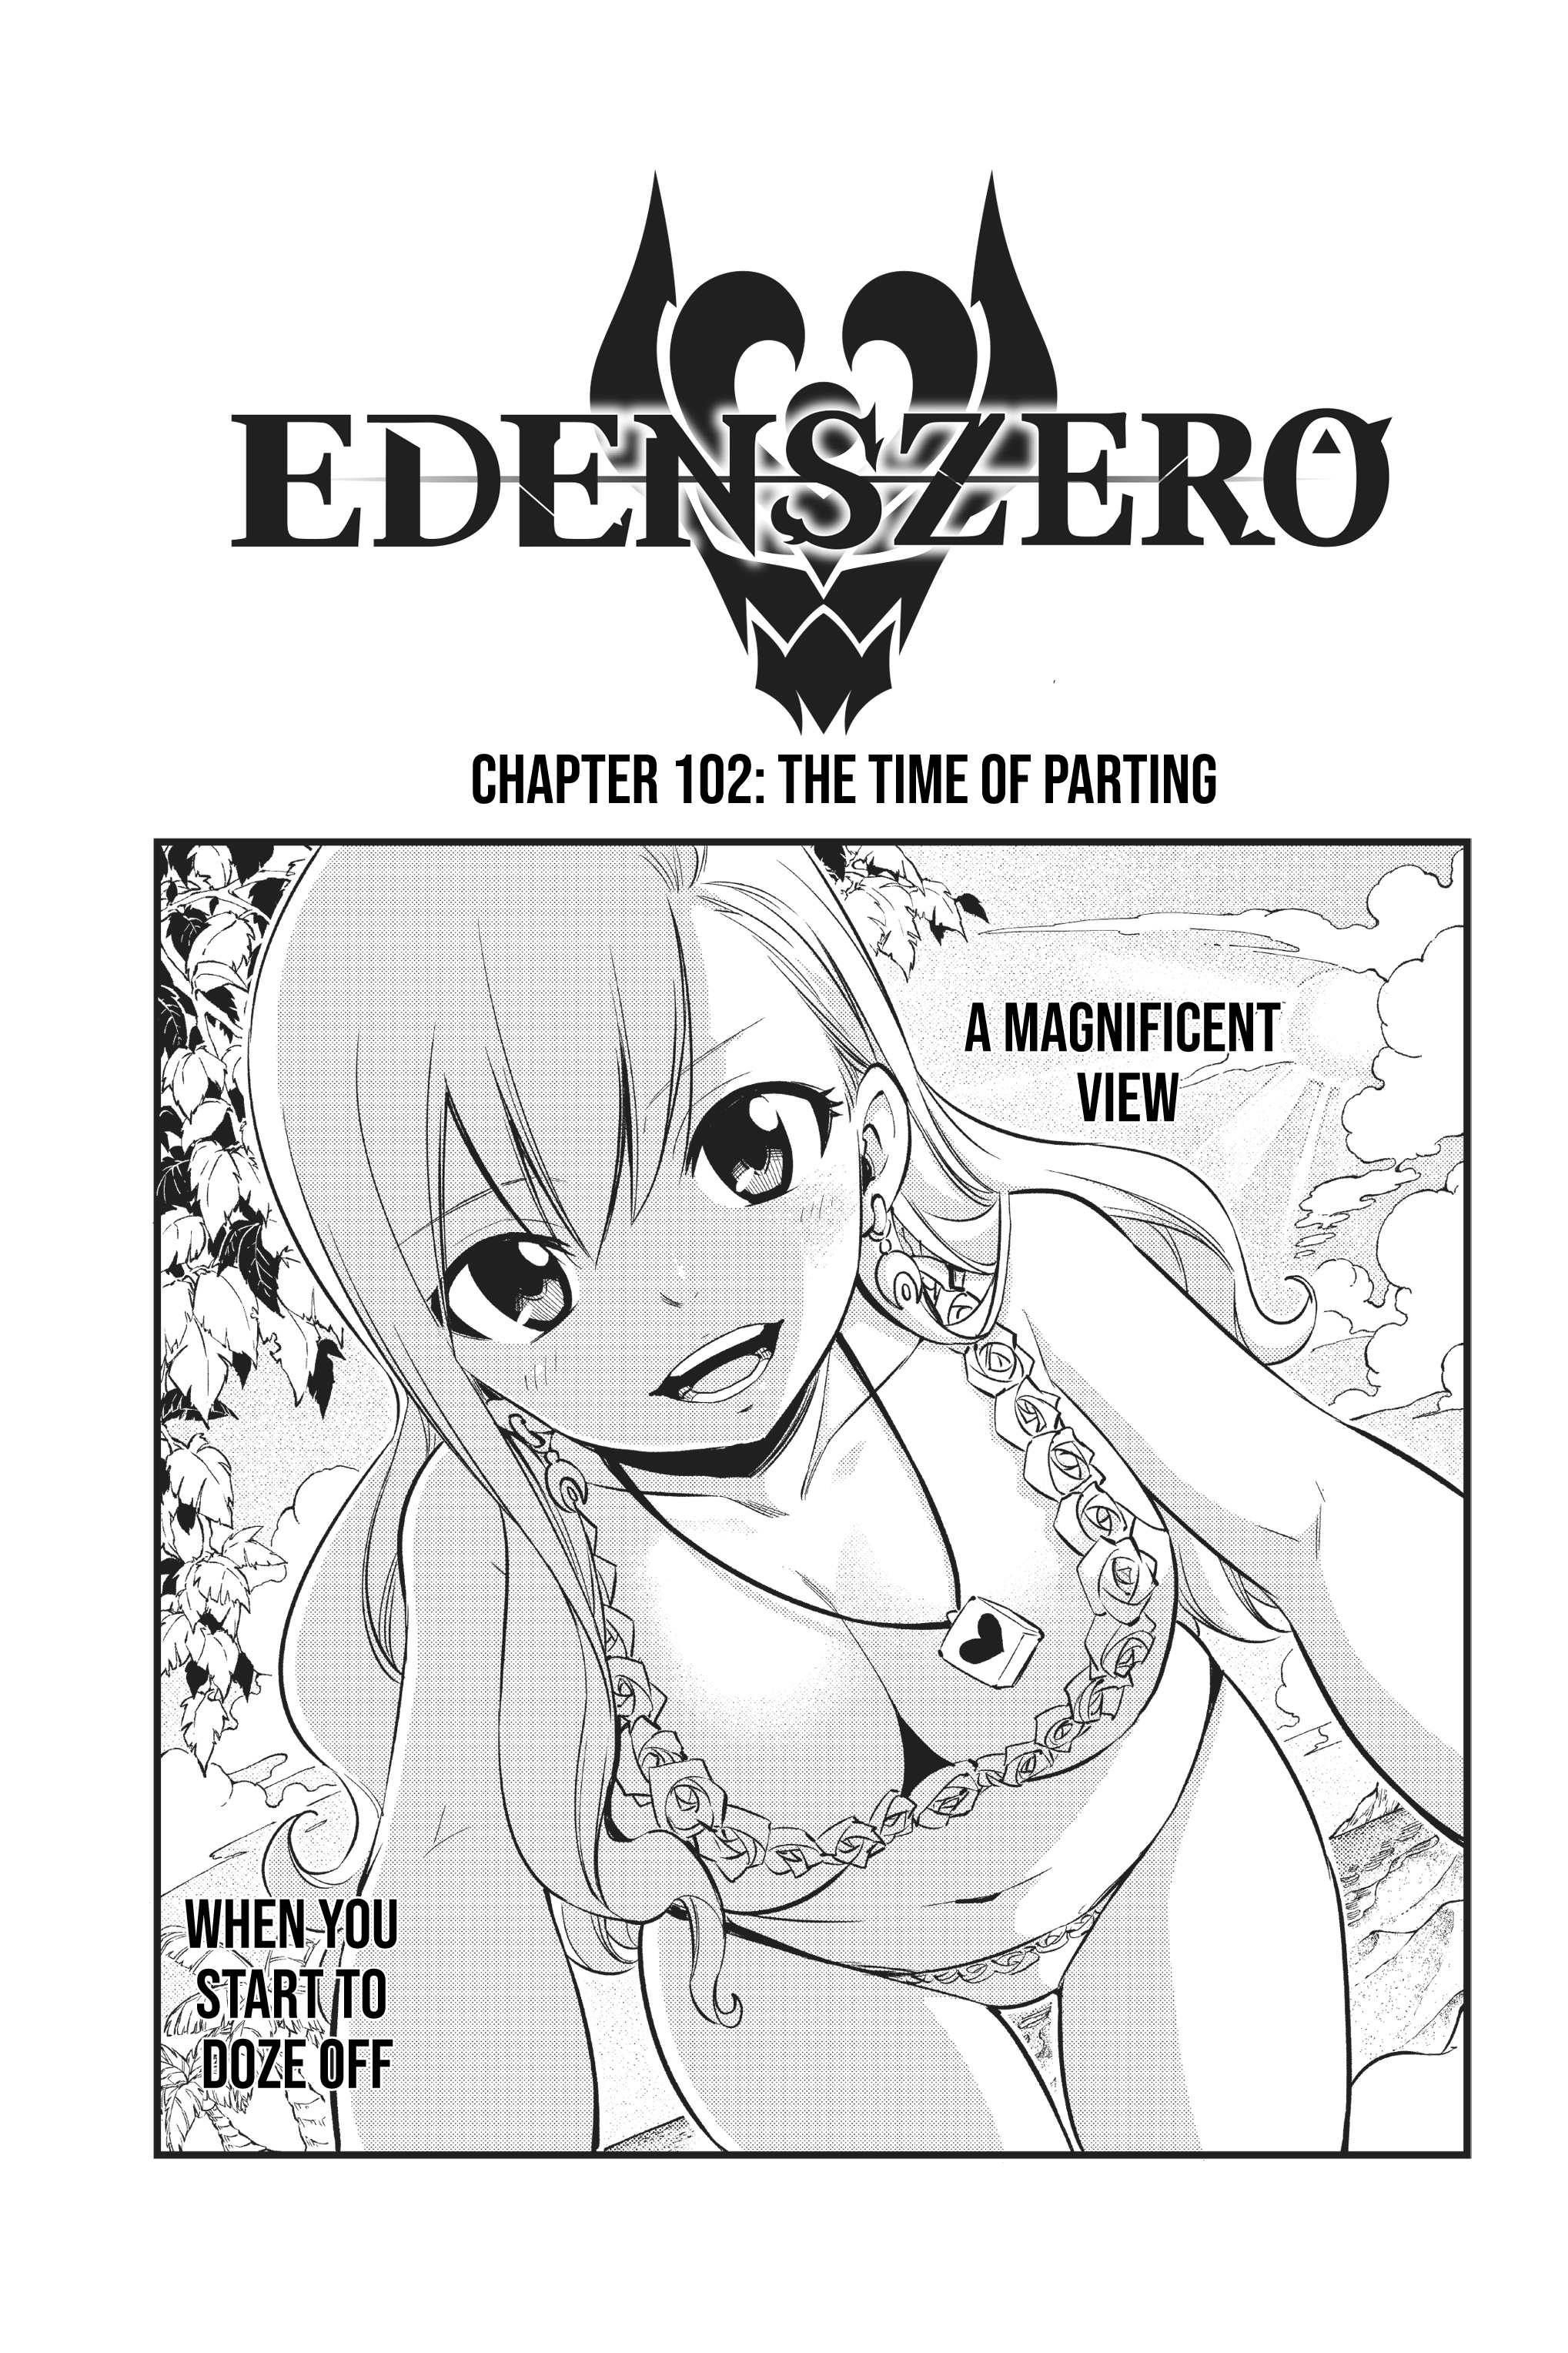 edens zero anime, edens zero game, edens zero characters, edens zero release date, edens zero trailer, edens zero wiki, edens zero anime announcement, edens zero anime adaptation release date, edens zero rebecca, shiki granbell, edens zero happy, edens zero 2, edens zero natsu and lucy, edens zero homura, edens zero shiki, edens zero rebecca ether gear, jessie edens zero, edens zero books, is edens zero good, edens zero fairy tail connection, fairy tail: 100 year quest myanimelist, rave master review, edens zero twitter, edens zero reddit, is eden zero connected to fairy tail, is eden zero good, eden zero shiki, elsie crimson, edens zero anime characters, edens zero game release date, rave master, fairy tail, mangadoctr, edens zero, volume 1, edens zero mangahelpers, shiki edens zero, homura edens zero, edens zero, edens zero manga, rebecca edens zero, reddit edens zero, edens zero mangahelper, edens zero manga online, hiro mashima edens zero, edens zero review, edens zero 11, xiaomei edens zero, hiro mashima edens zero 1, edens zero 65, edens zero volume 1, edens zero volume 8, edens zero vol 6, edens zero 2 hiro mashima, edens zero amazon, edens zero hiro mashima, edens zero volume, edens zero manga free, edens zero volume 10, edens zero vol 7, edens zero crunchyroll, edens zero manga 1, edens zero volume 11, manga eden's zero, edens 0, edens zero volume 5, edens zero volume 2, edens zero mangareader, nino edens zero, edens zero 12, figurine edens zero, edens one edens zero, rebecca edens, edens zero volume 4, crunchyroll edens zero, edens zero panini, edens zero 60, edens zero vol 12, read edens zero, edens zero read, edens zero 106, edens zero read online, fairy tail edens zero, edens zero 84, edens zero 98, edens zero 85, edens zero 91, read edens zero online, edens zero 86, manga edens zero, edens zero manga read, edens zero 75, edens zero 113, eden zero mangahelper, read edens zero manga, eden zero fairy tail, edens zero manga read online, read eden zero manga, fairy tail edens zero manga, edens zero manga english, edens zero read online free, read edens zero manga online, edens zero online read, edens zero manga volumes, mangakakalot eden zero, edens zero manga 82, eden 0 manga, edens zero manga 69, edens zero manga 81,Edens Zero,Eden's Zero,Edens Zero manga,Edens Zero anime,manga,Eden's Zero manga,Eden's Zero anime,read Edens Zero,read Edens Zero,chapter,chapters,webcomic